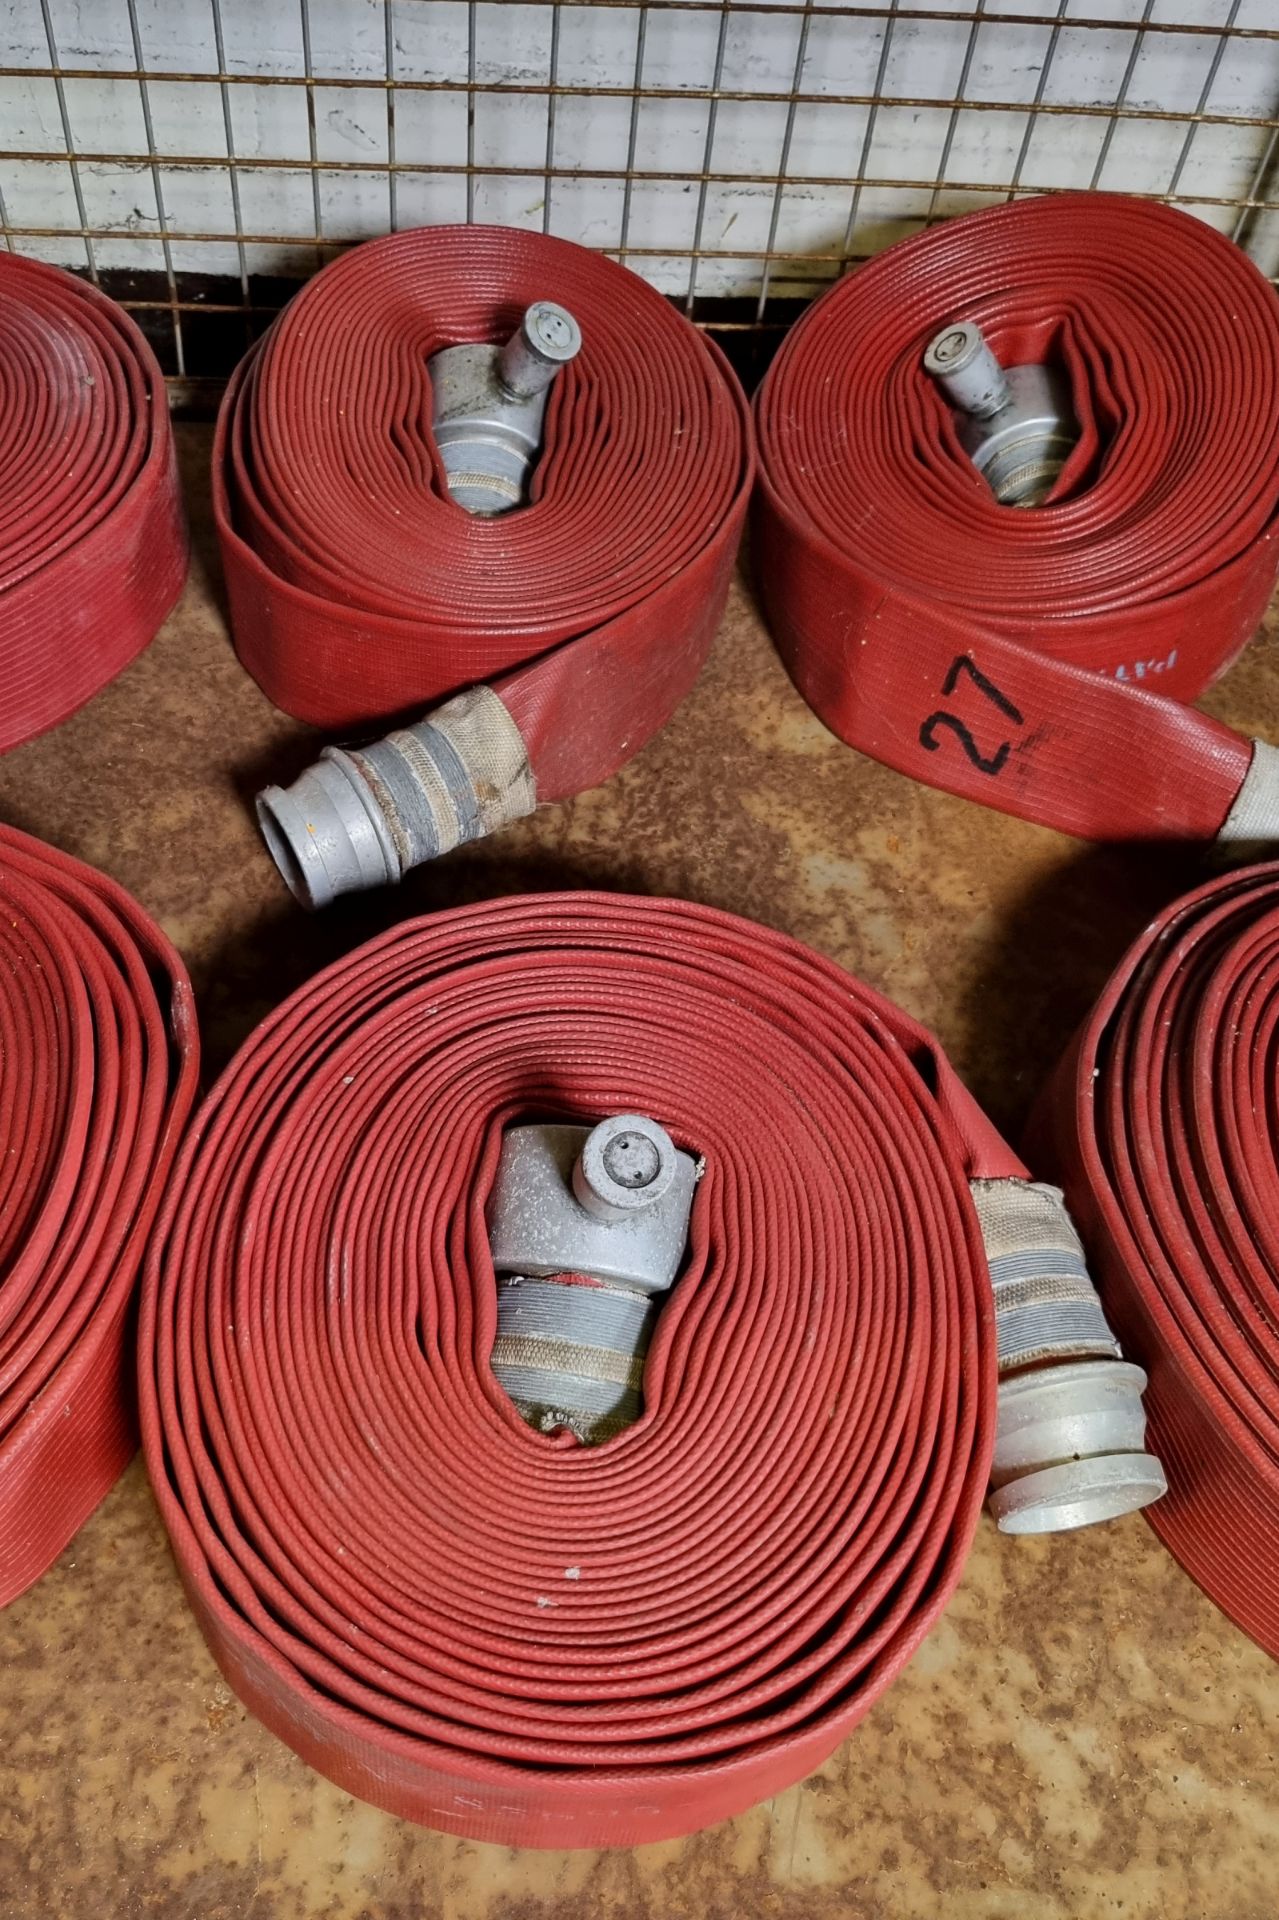 6x Angus Duraline 64mm lay flat hoses with couplings - approx 15m in length - Bild 4 aus 5